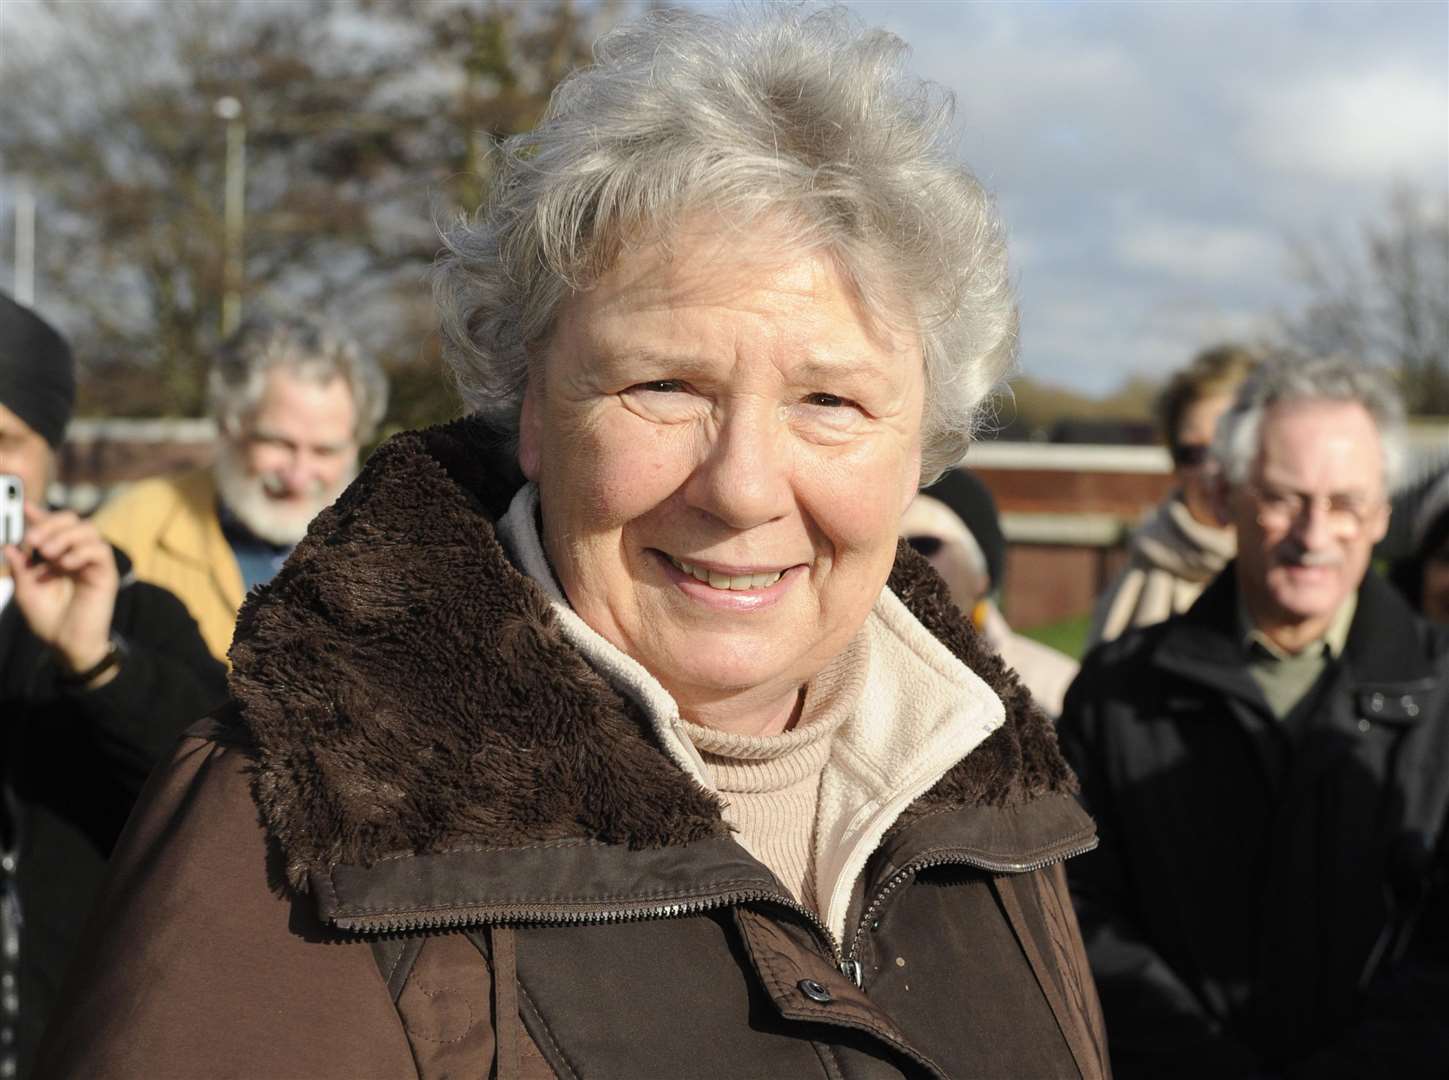 Canterbury resident and campaigner Sue Langdown